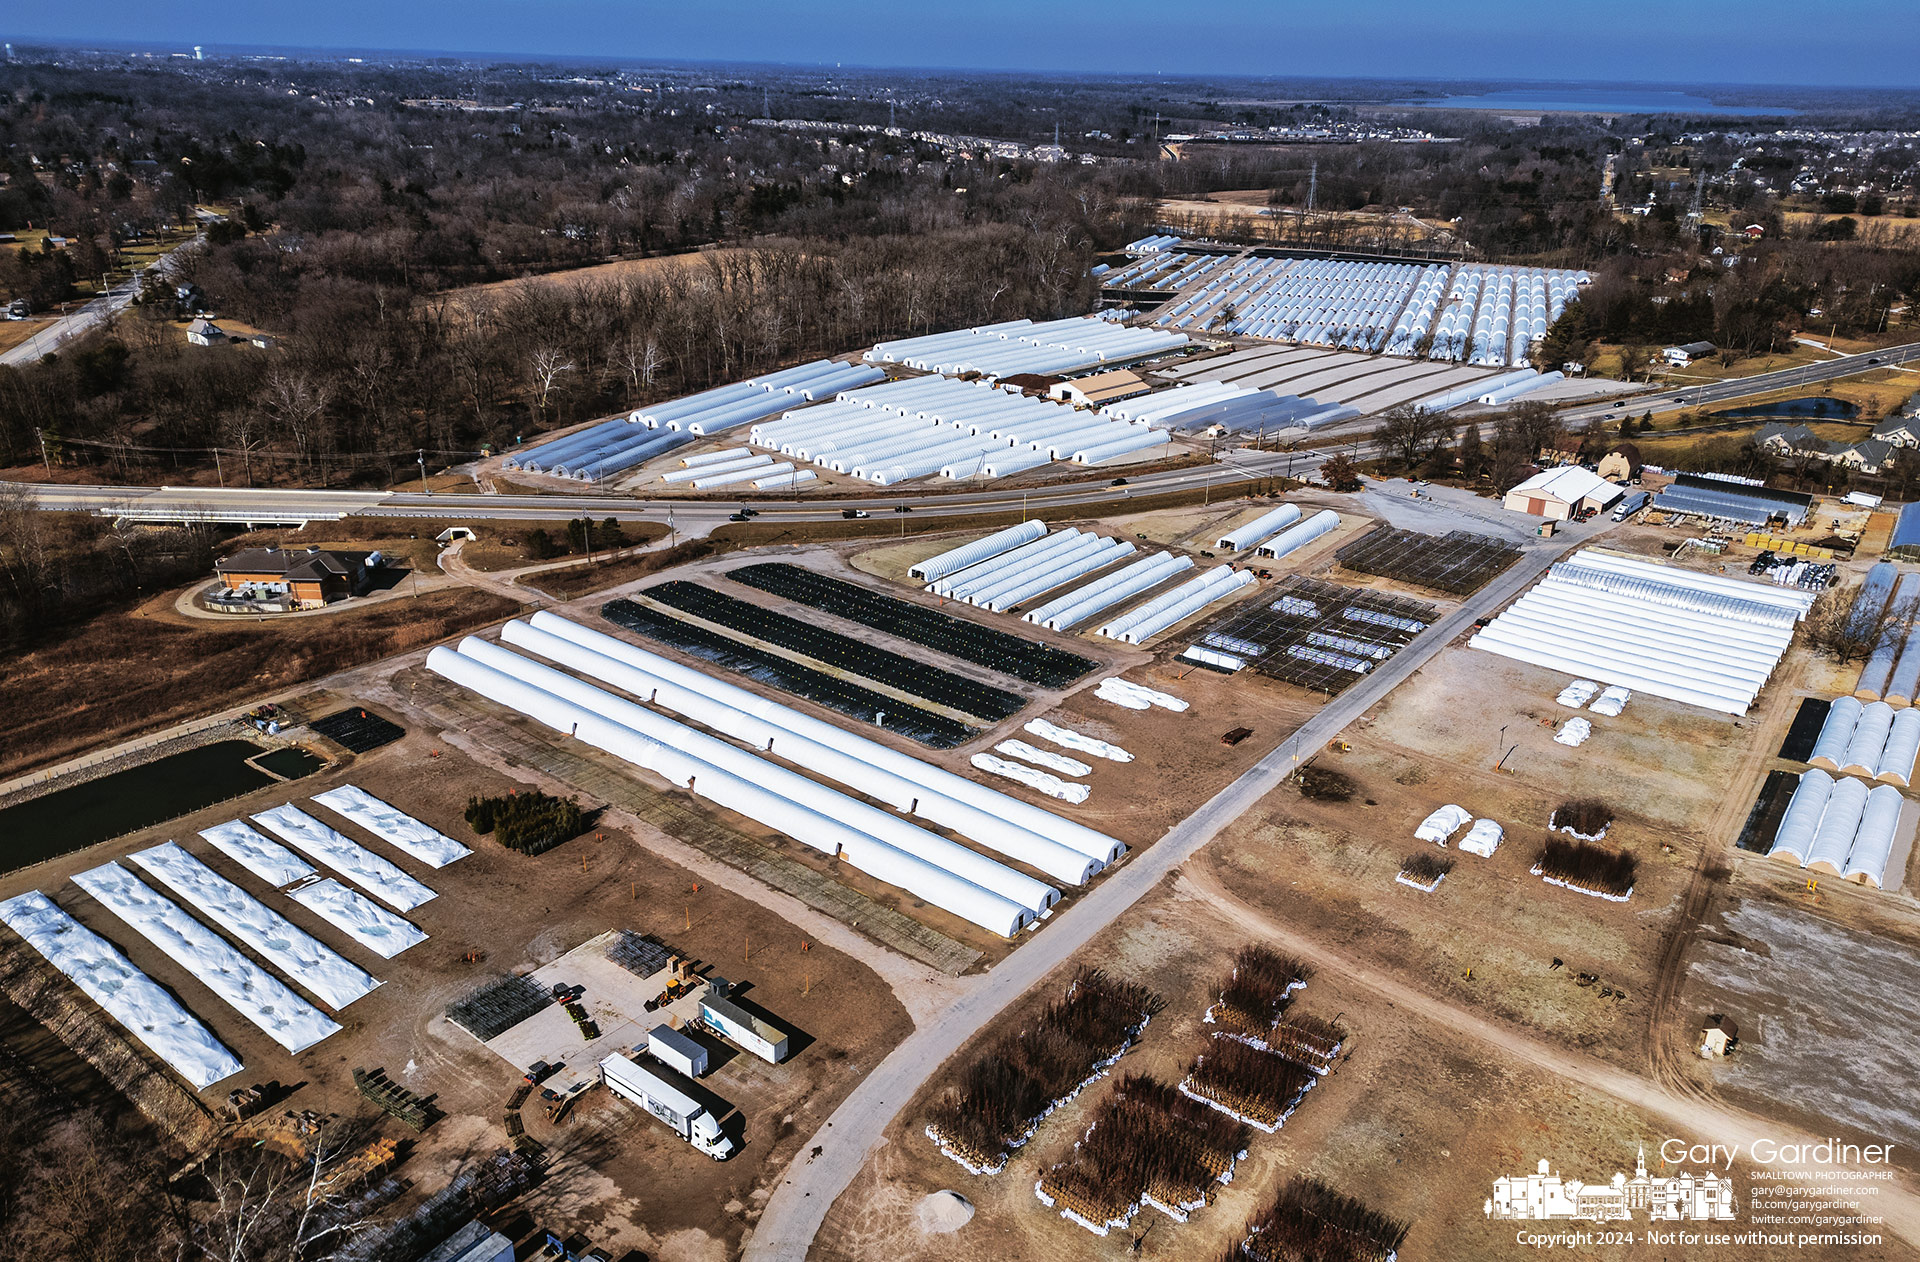 Acorn Nursery's greenhouses covered in plastic for the winter sit along Alum Creek just below the Alum Creek Park dam, in the background. My Final Photo for February 12, 2024.